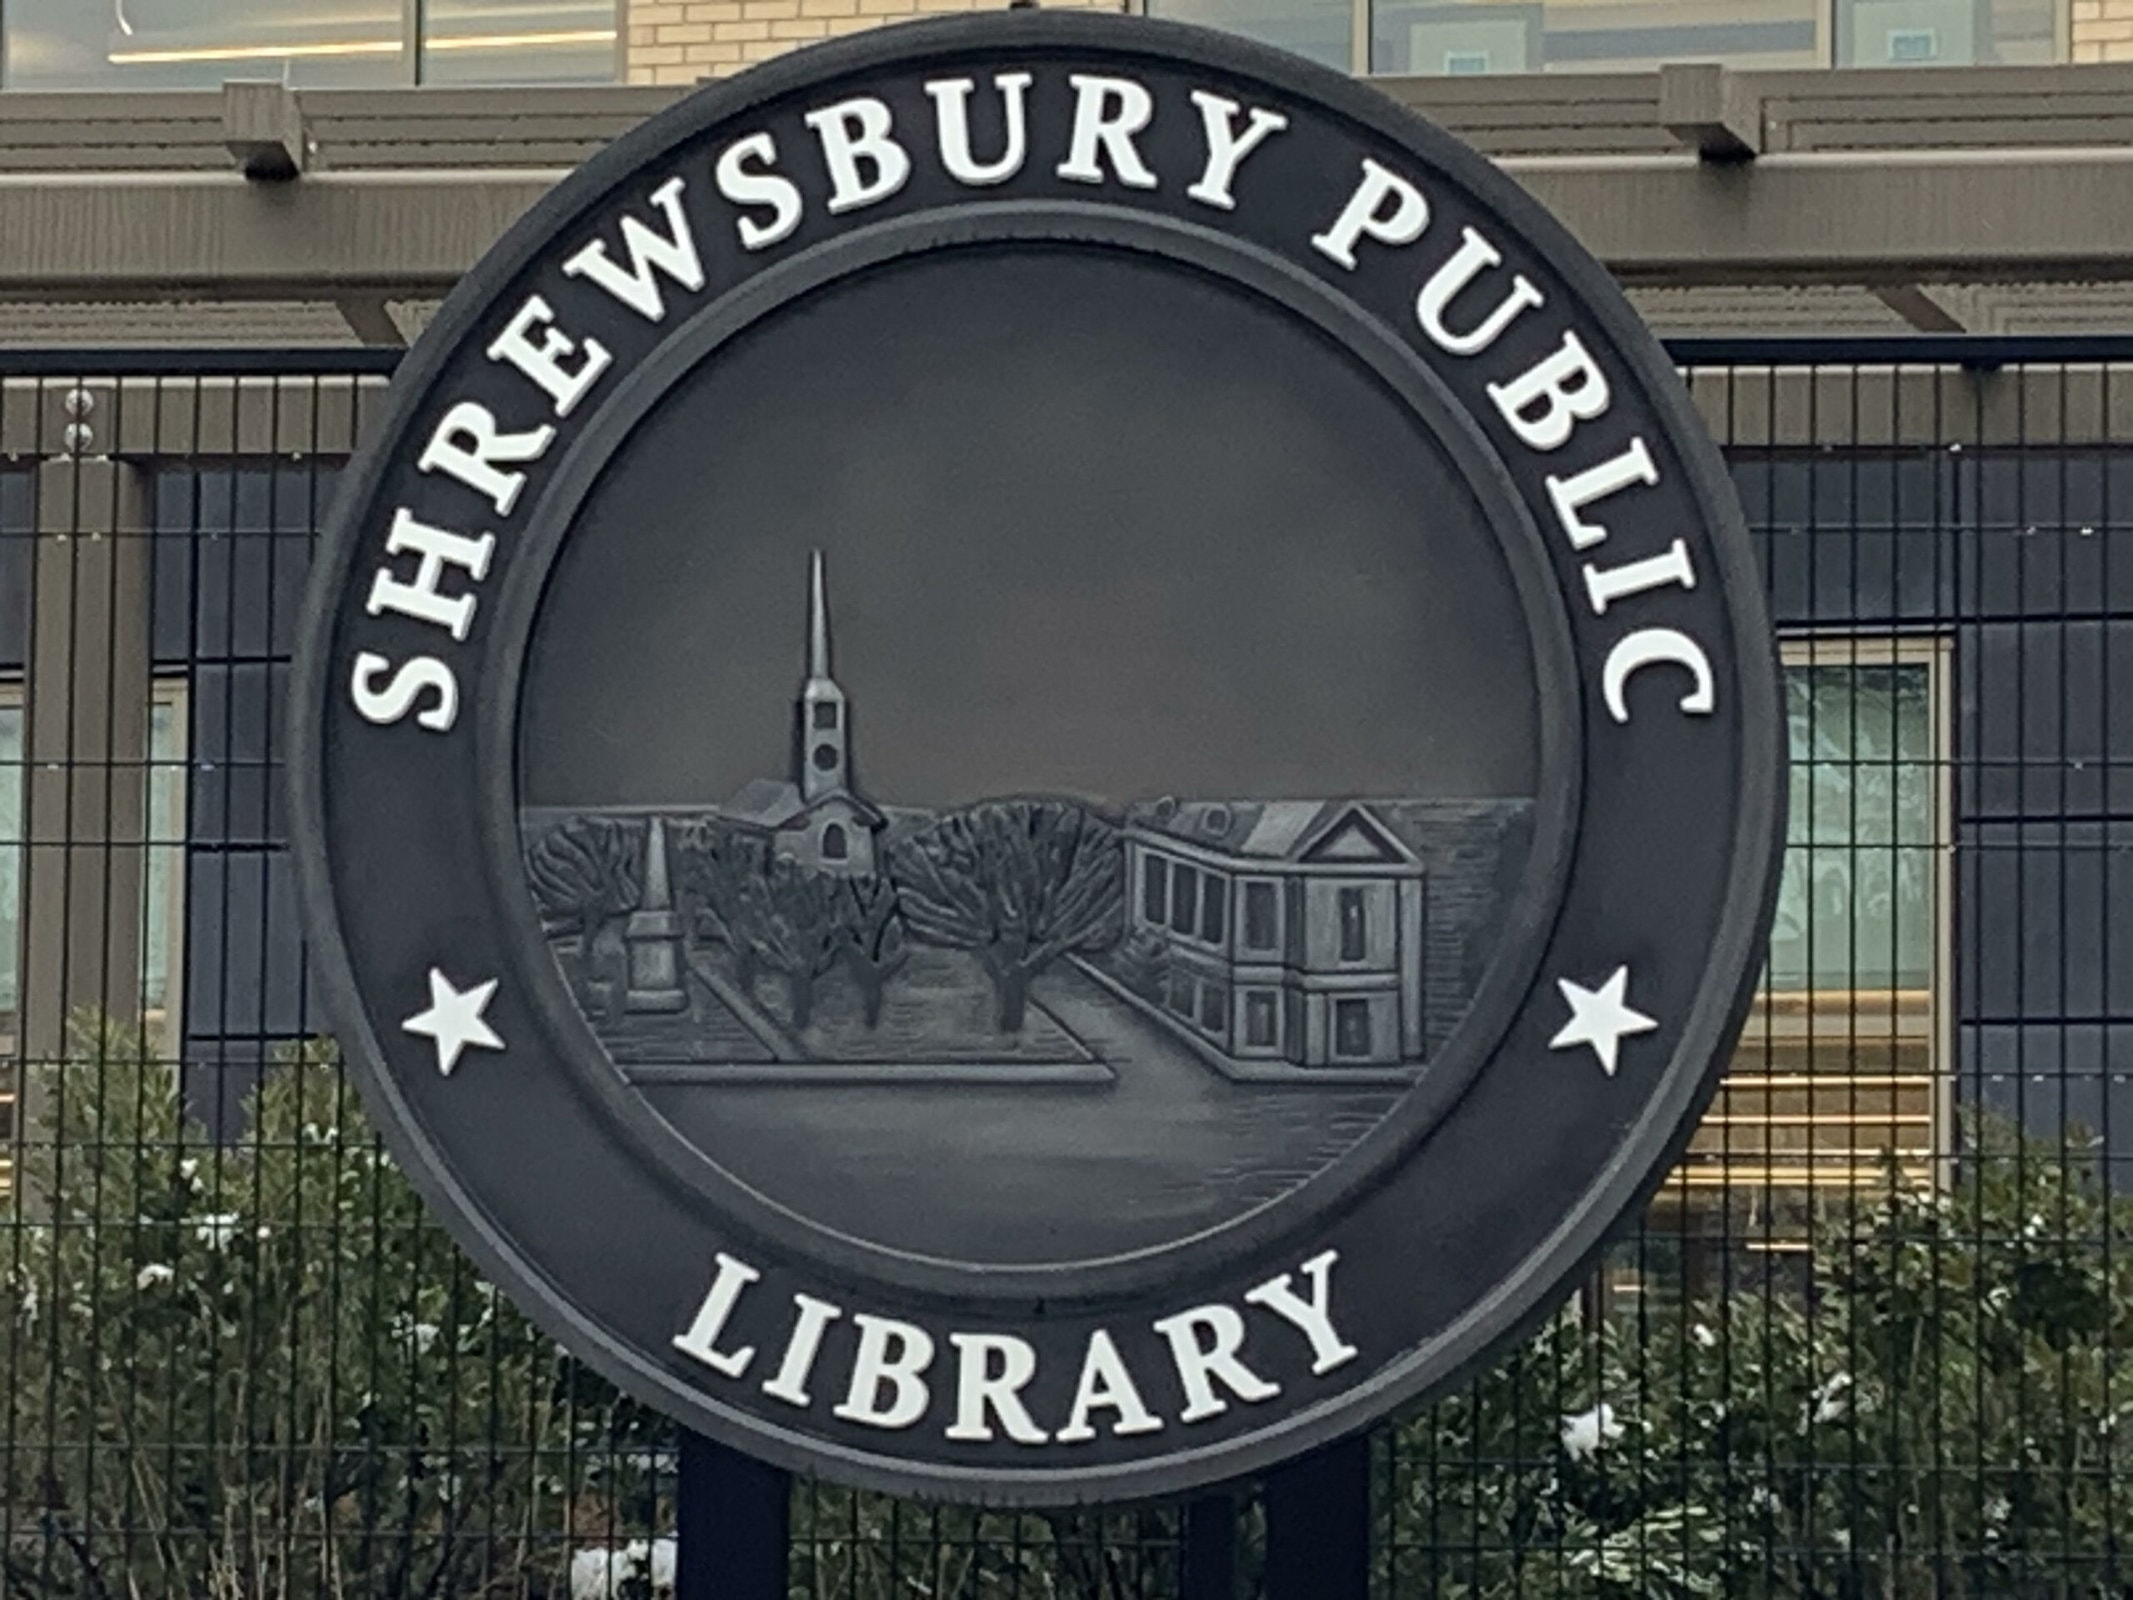 Legends and lore of Ivy League come to Shrewsbury library